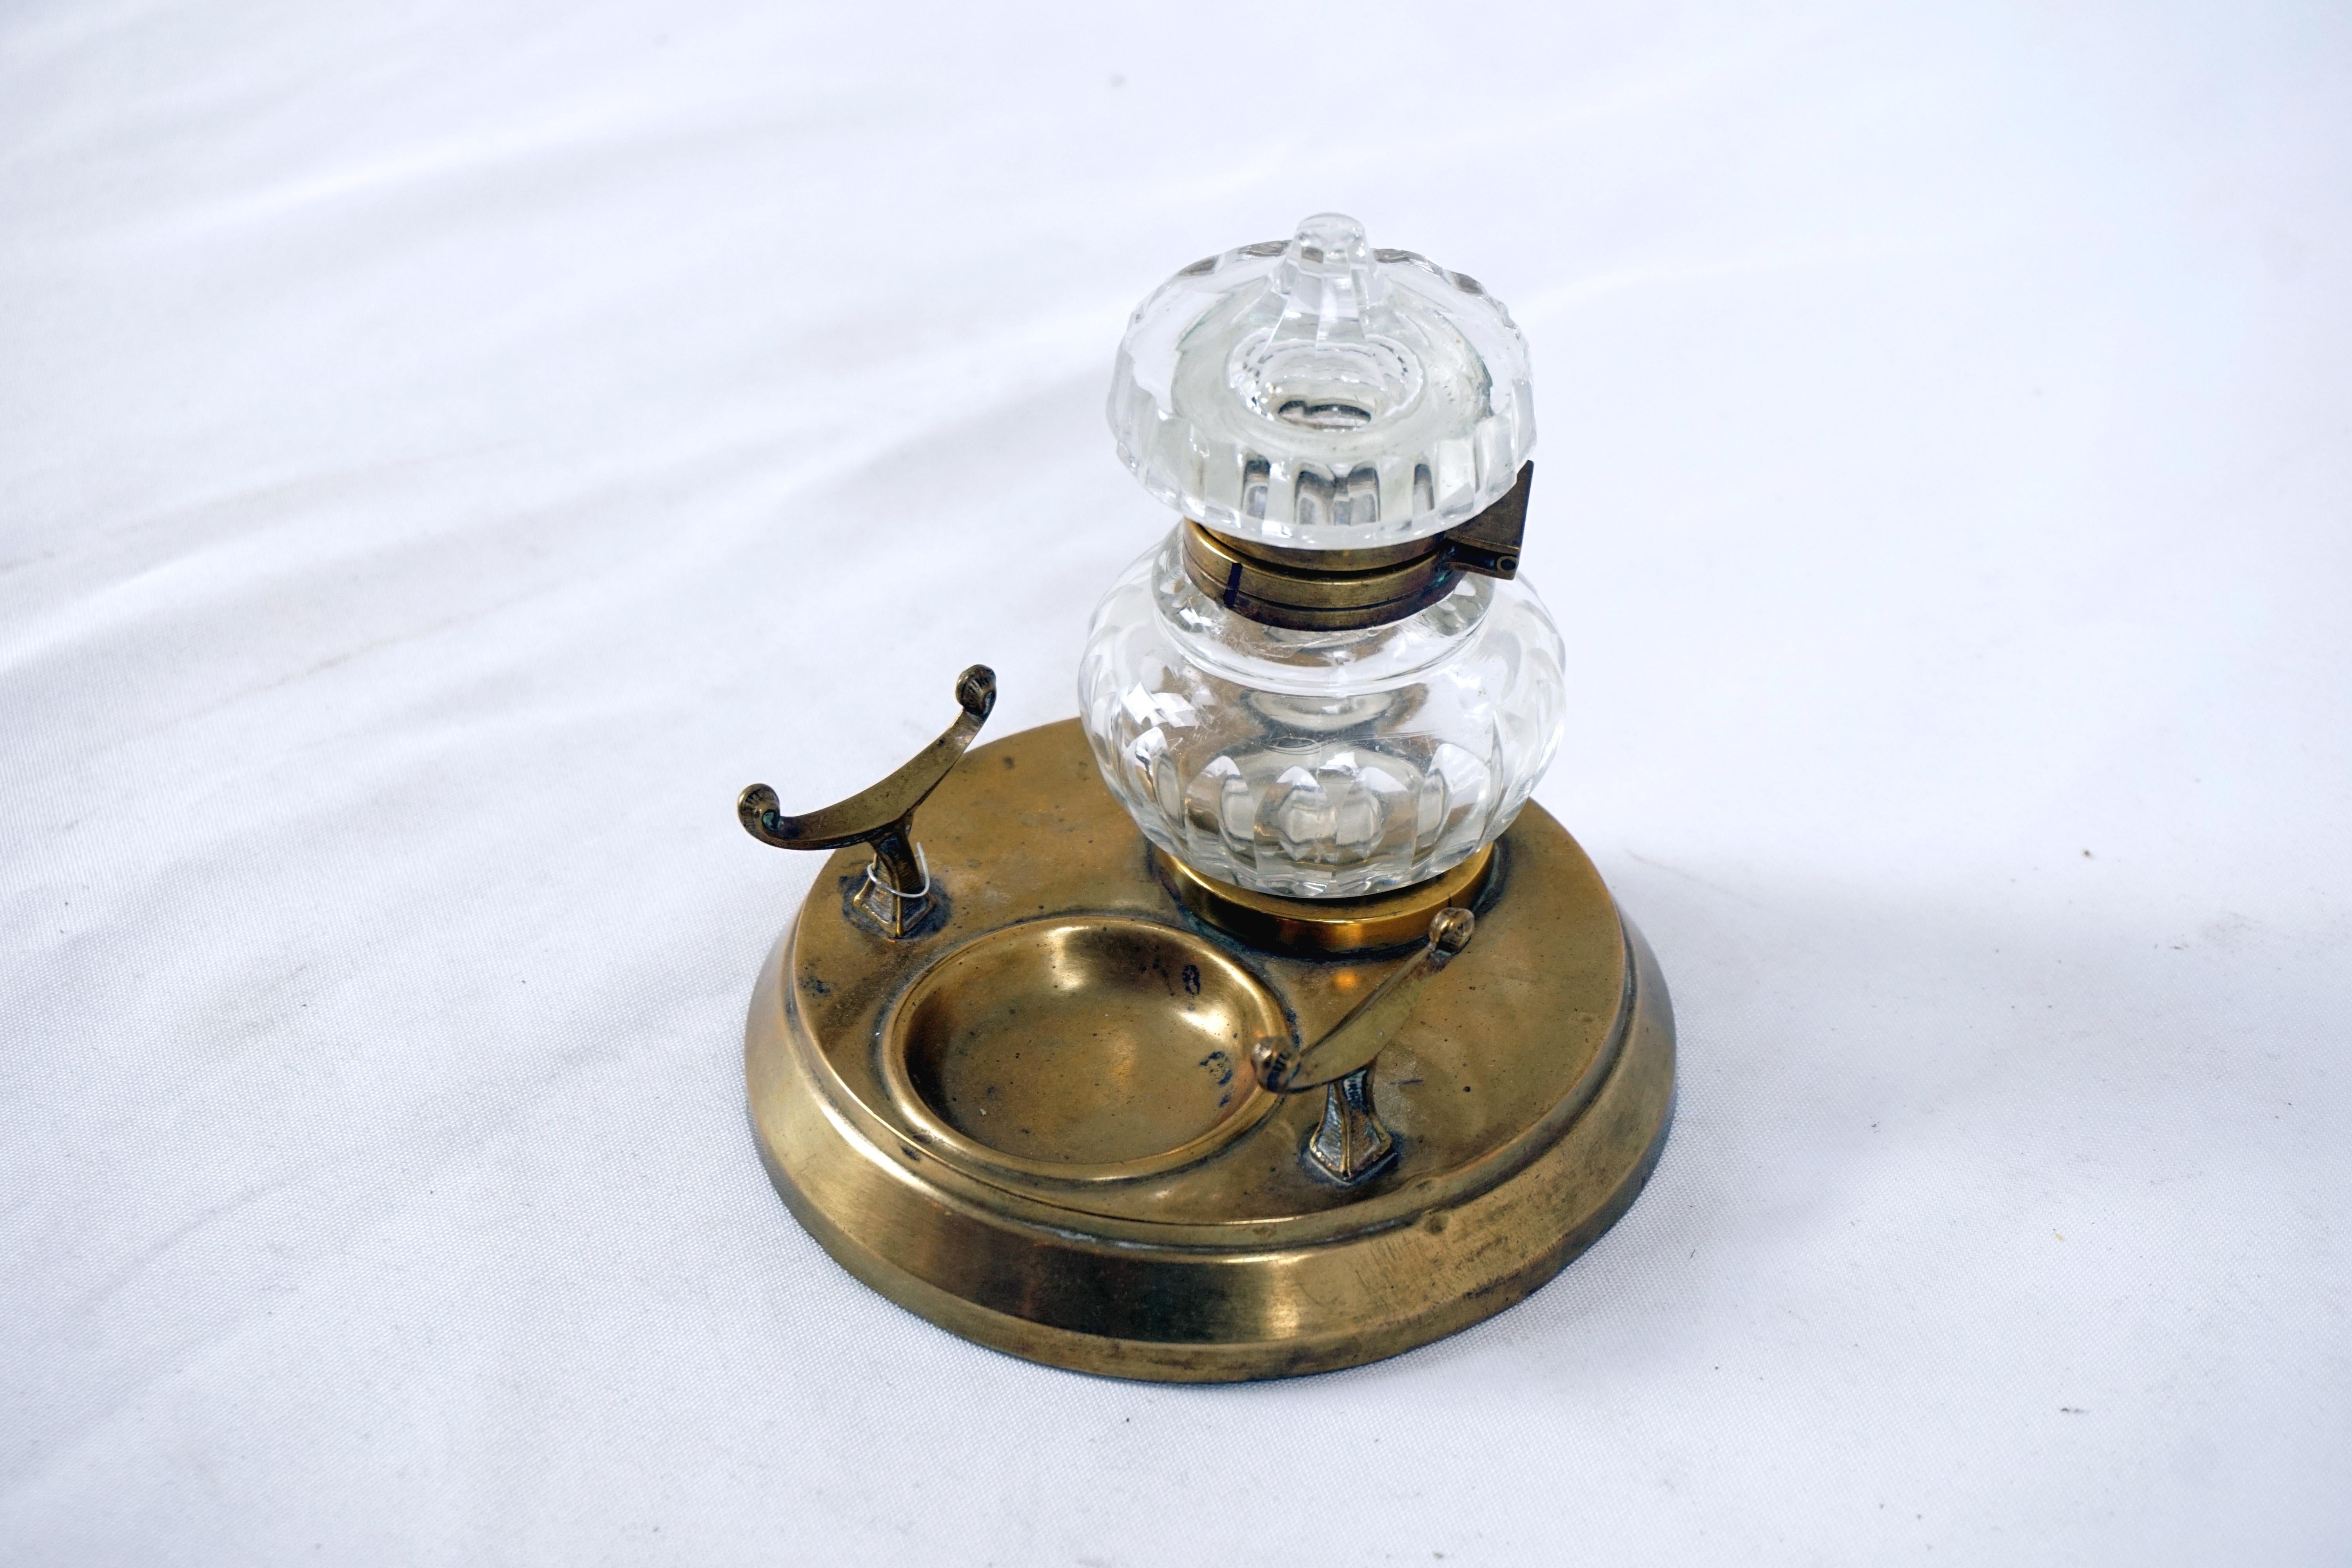 Antique brass inkstand, circular inkwell, with pen rest, Scotland 1910, H557

Scotland 1910
Brass and glass
Tall glass inkwell to the back
Dish for stamps in the centre
Pen rest to the front

H557

Measures: 4.25